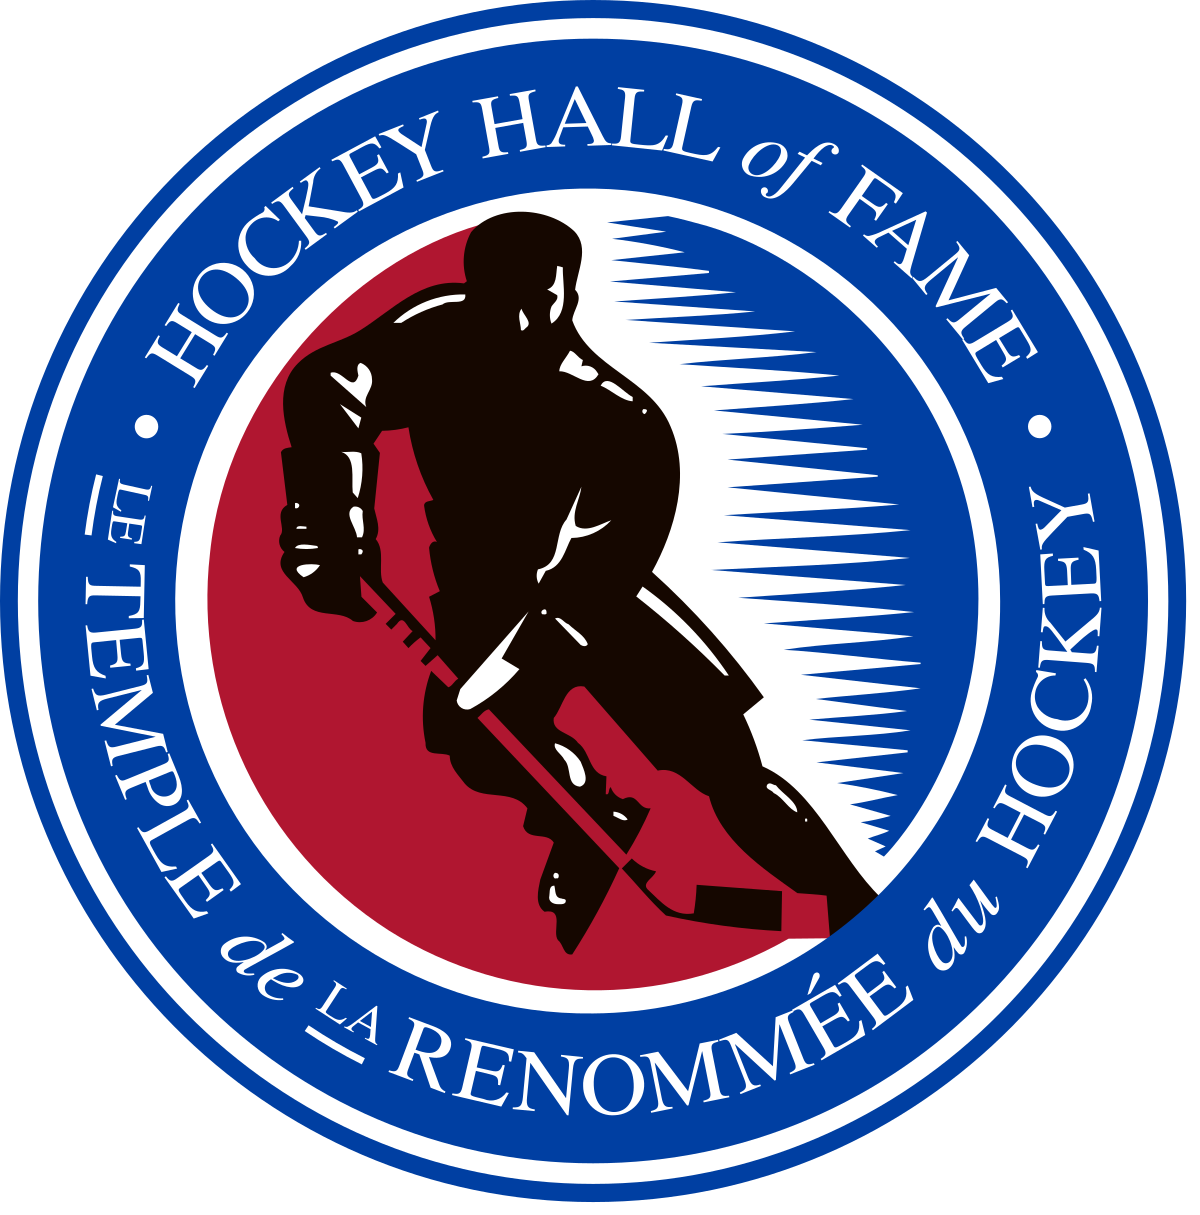 Hockey Hall of Fame Logo. Blue circle with an ice hockey player in the middle. The words  "Hockey Hall of Fame" in English and in French are written in the outer circle. 